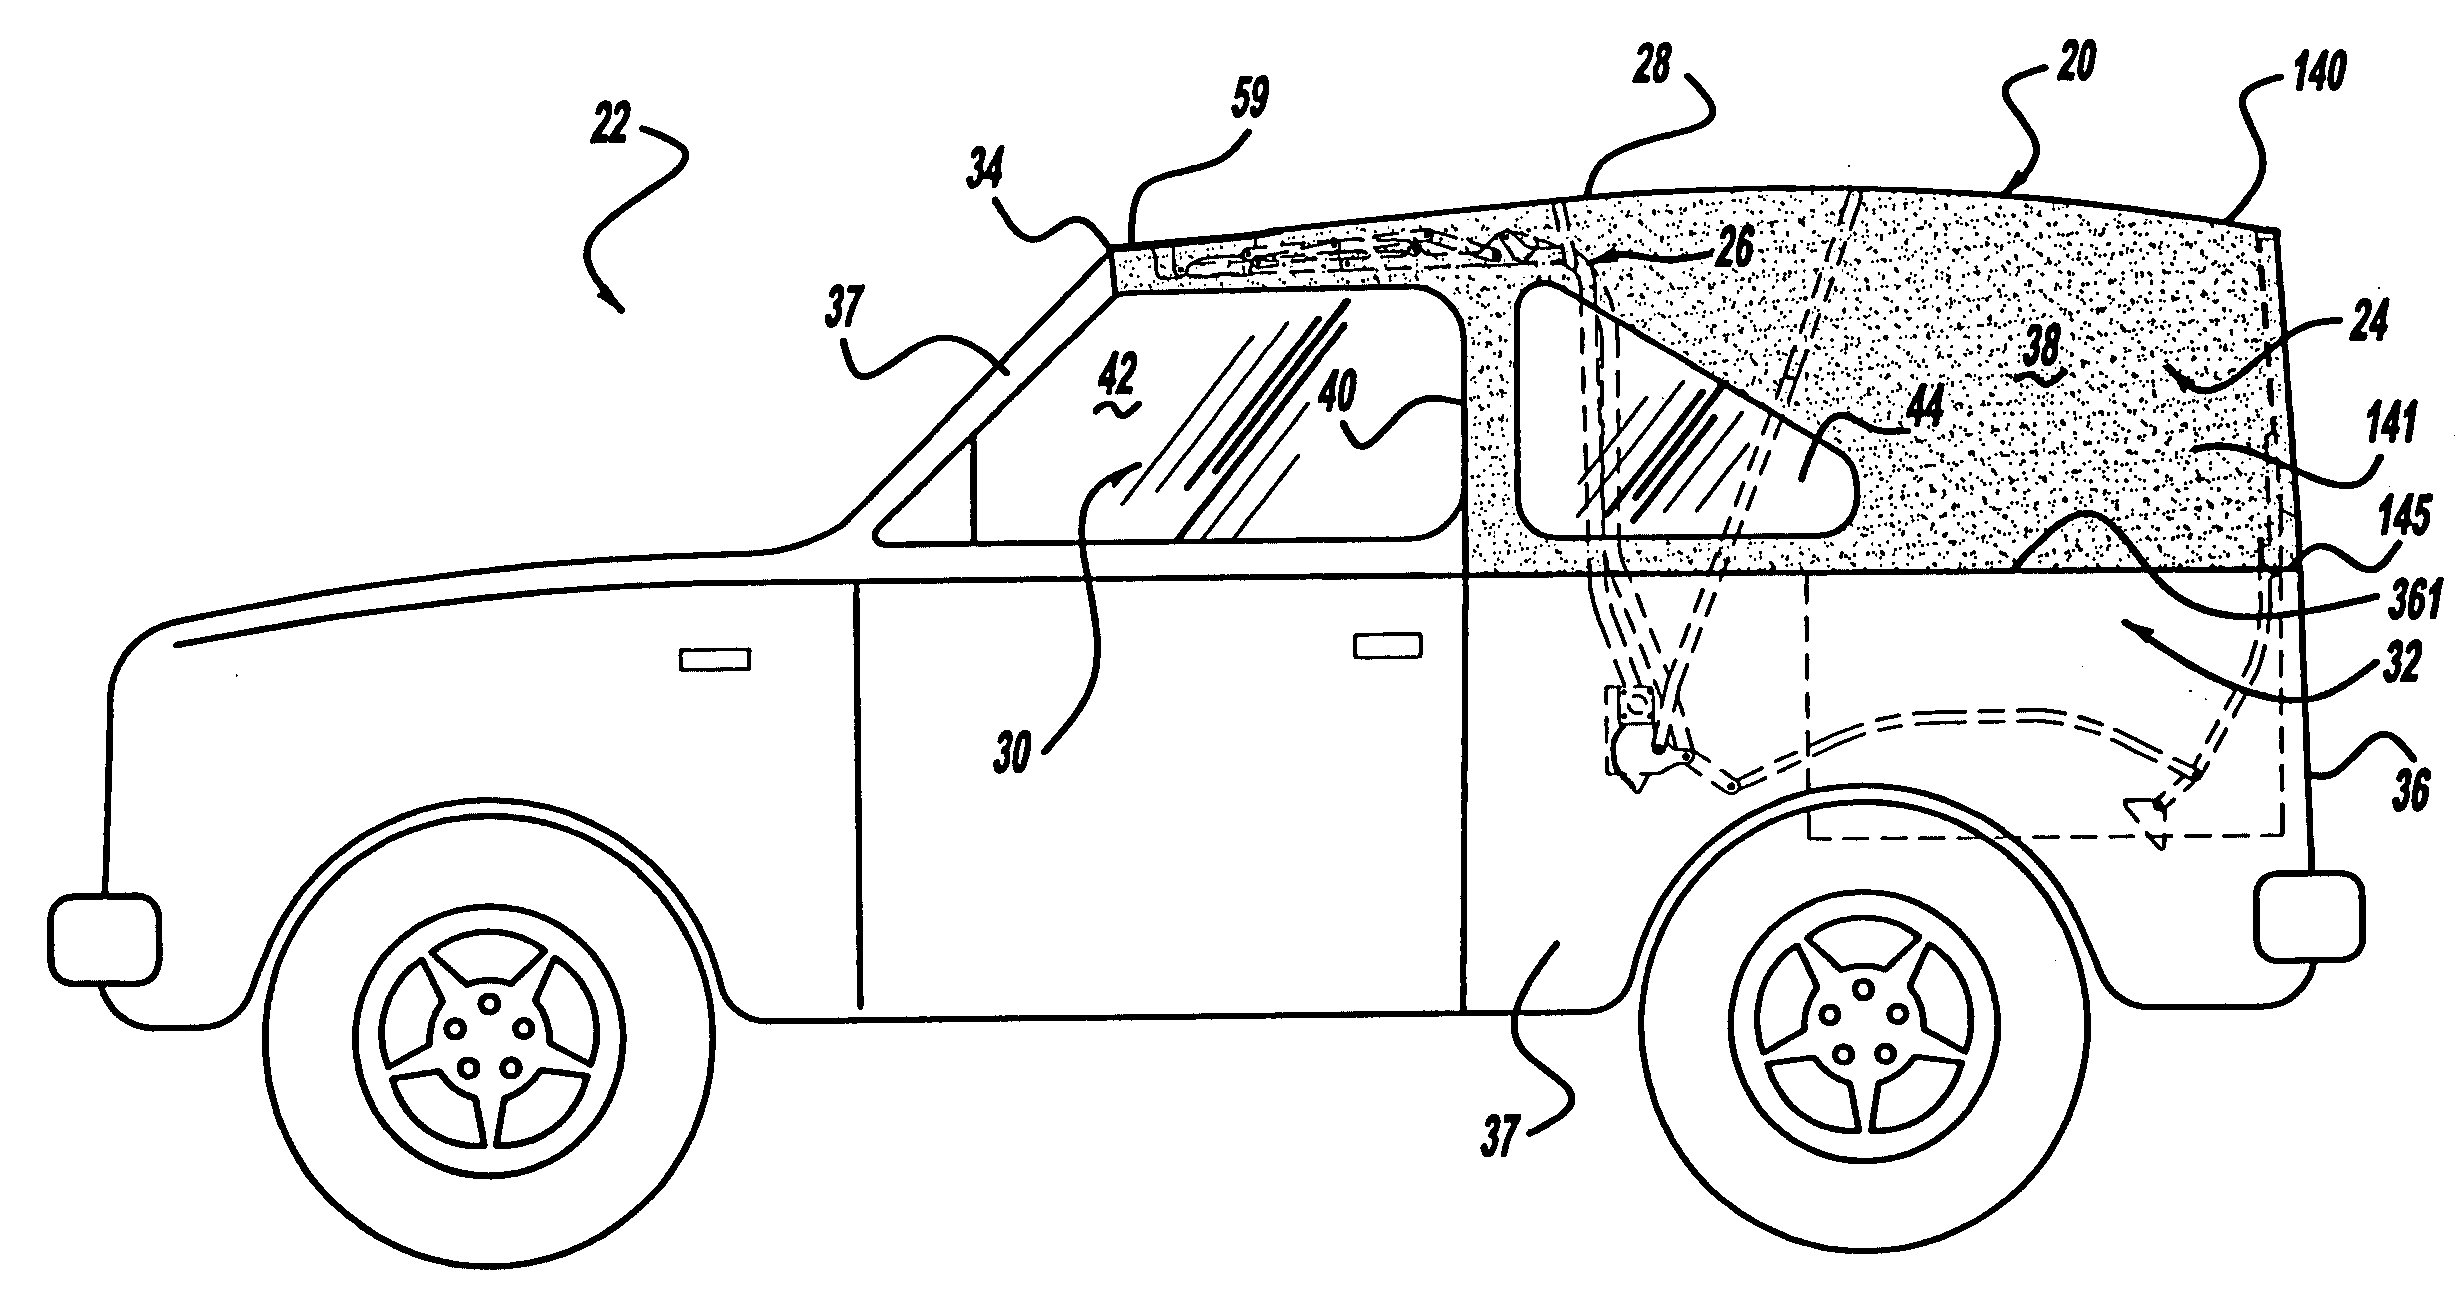 Soft-top convertible roof system for an automotive vehicle